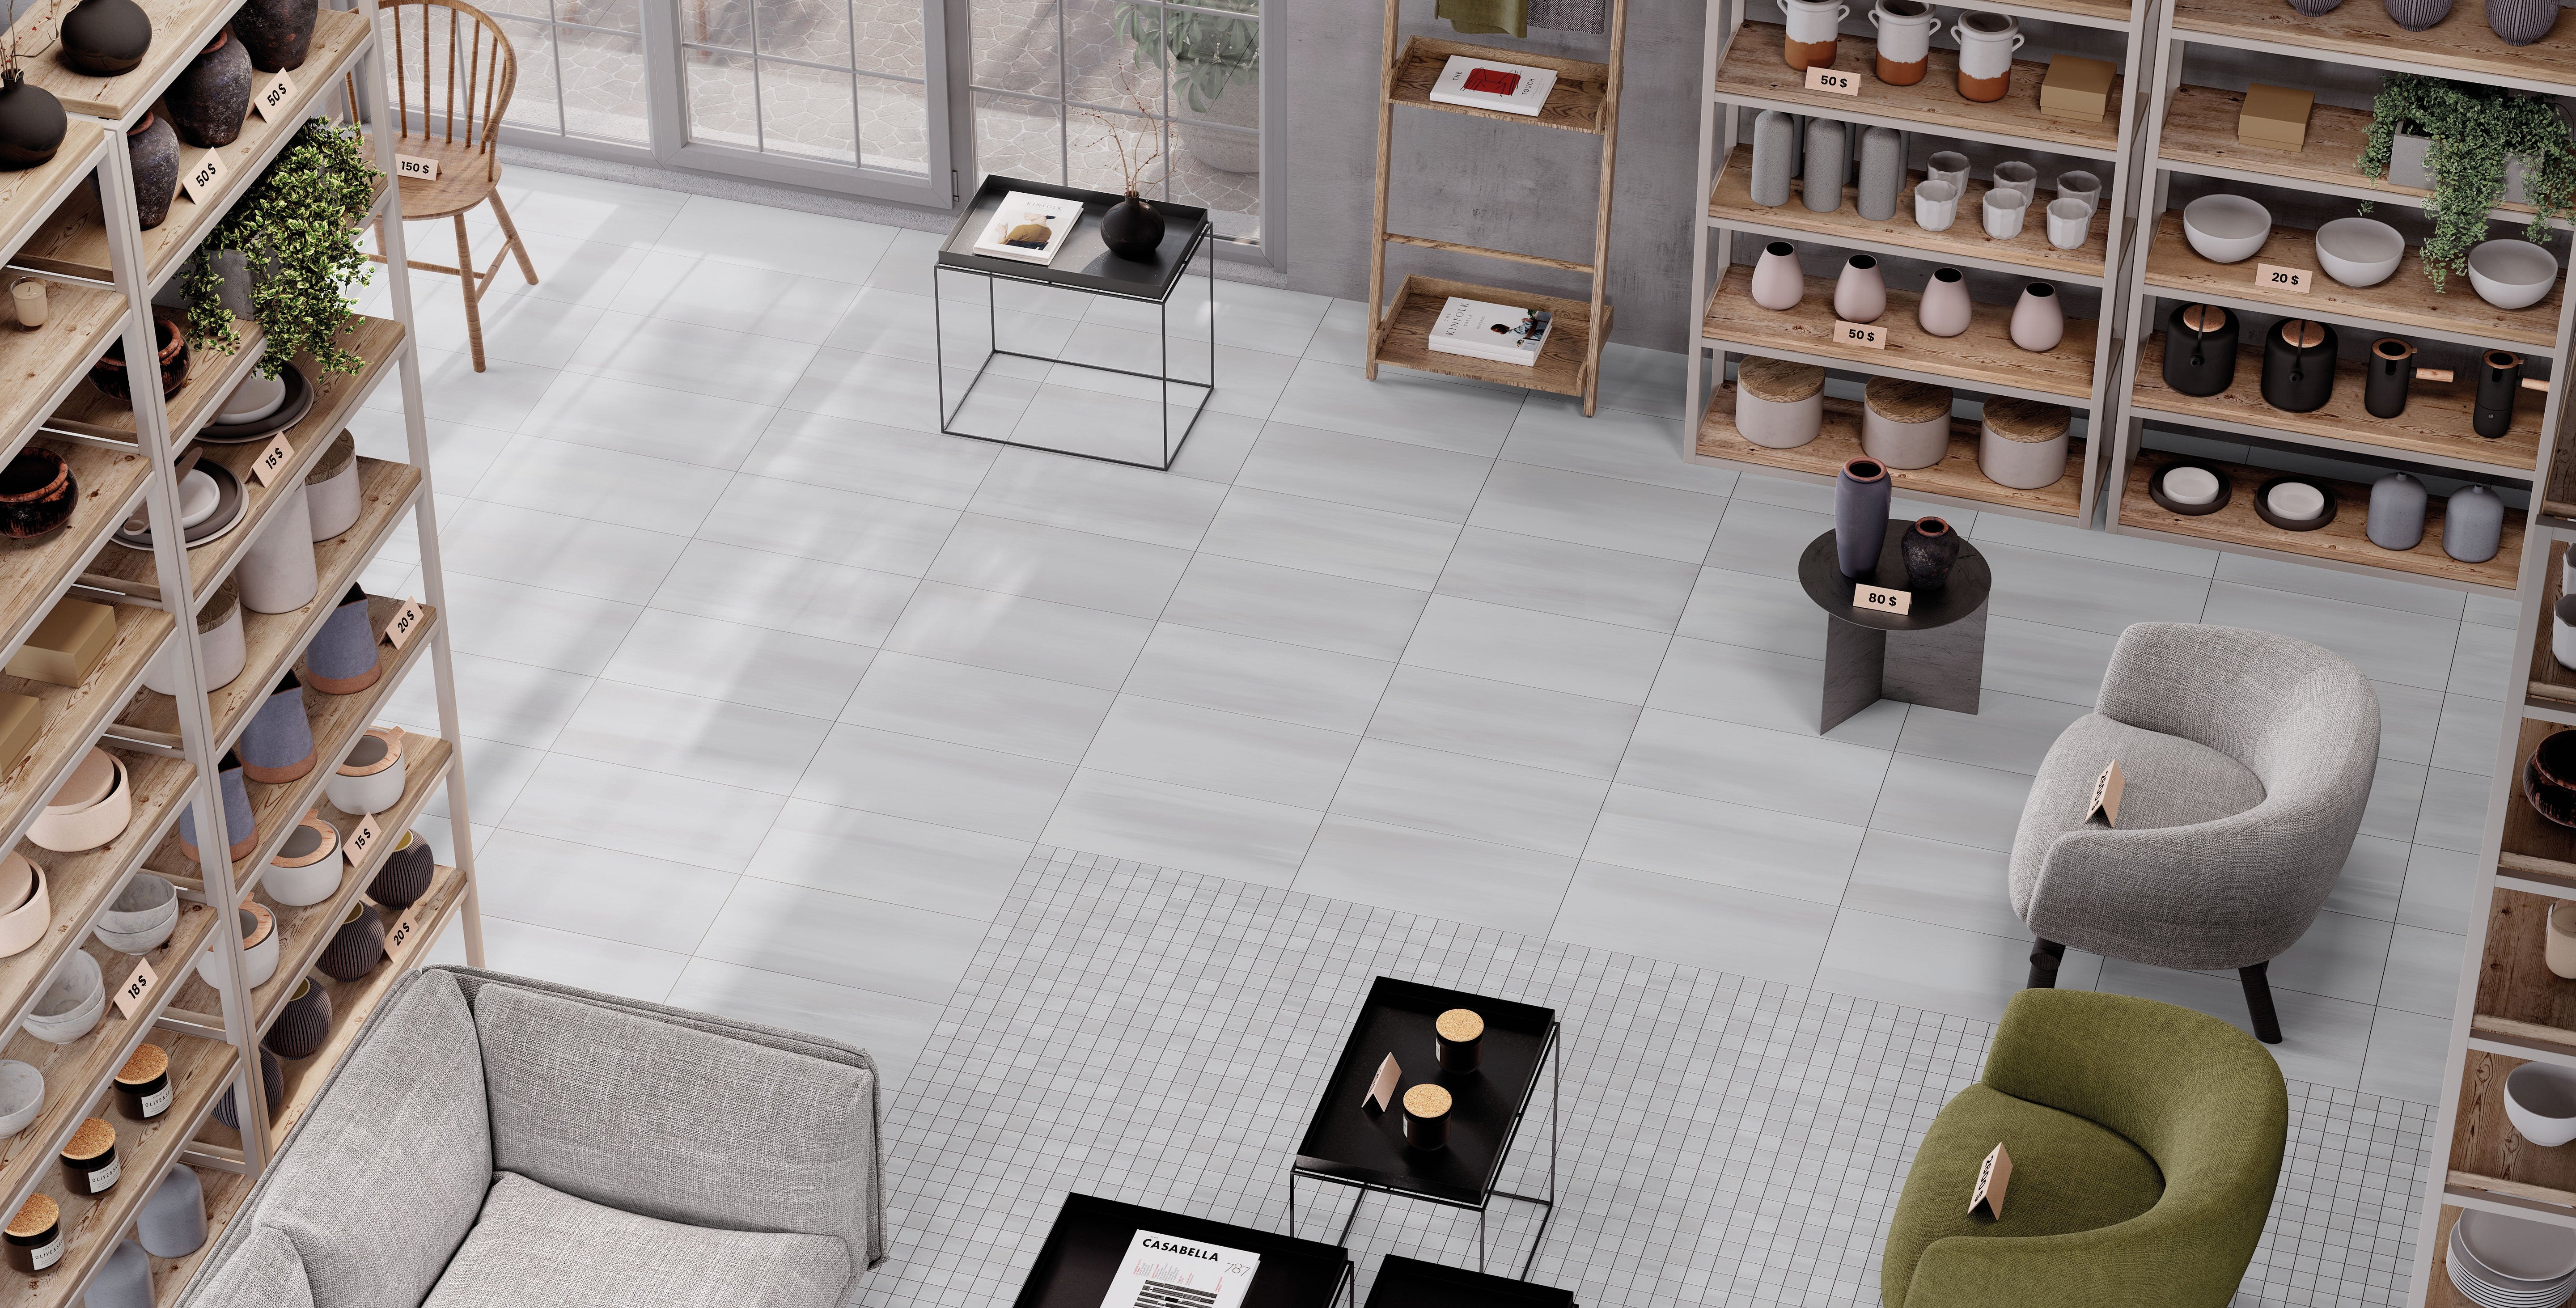 Porcelain tile collection from Surface Group featuring modern, sleek Miami-style tiles in a contemporary living space setting.